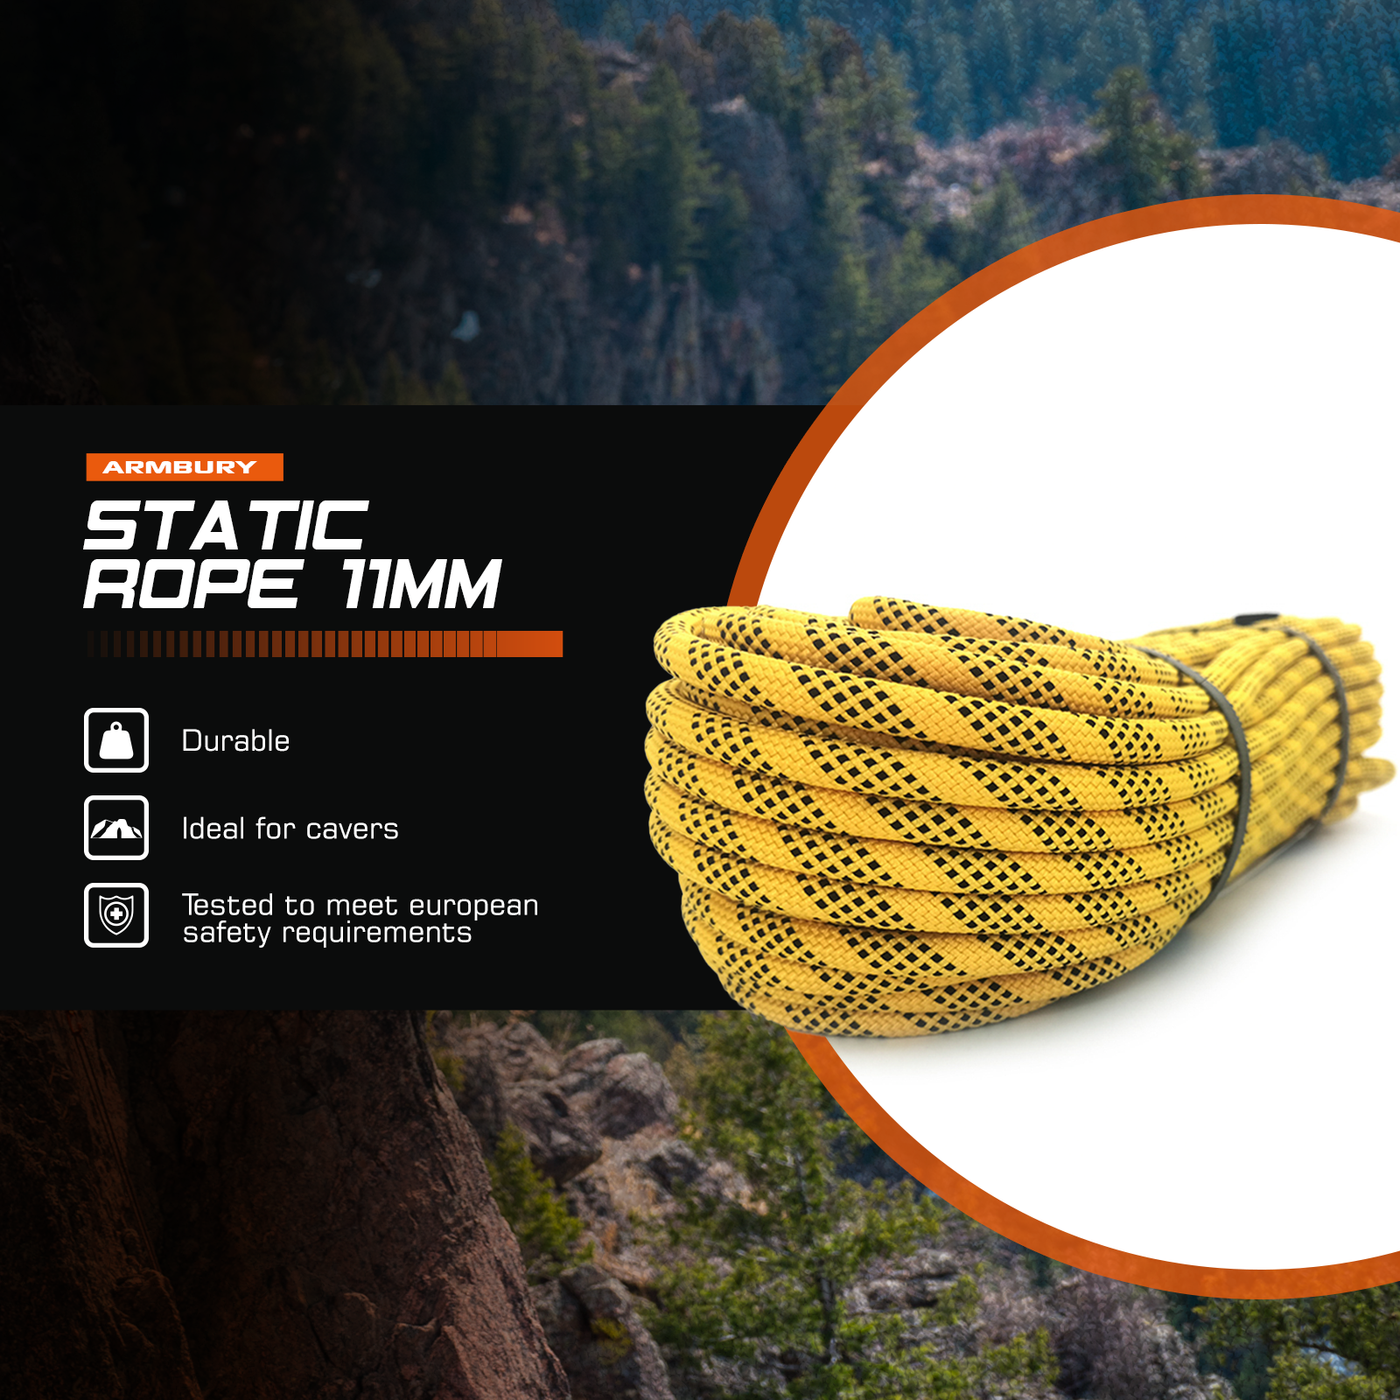 STATIC ROPE 11MM